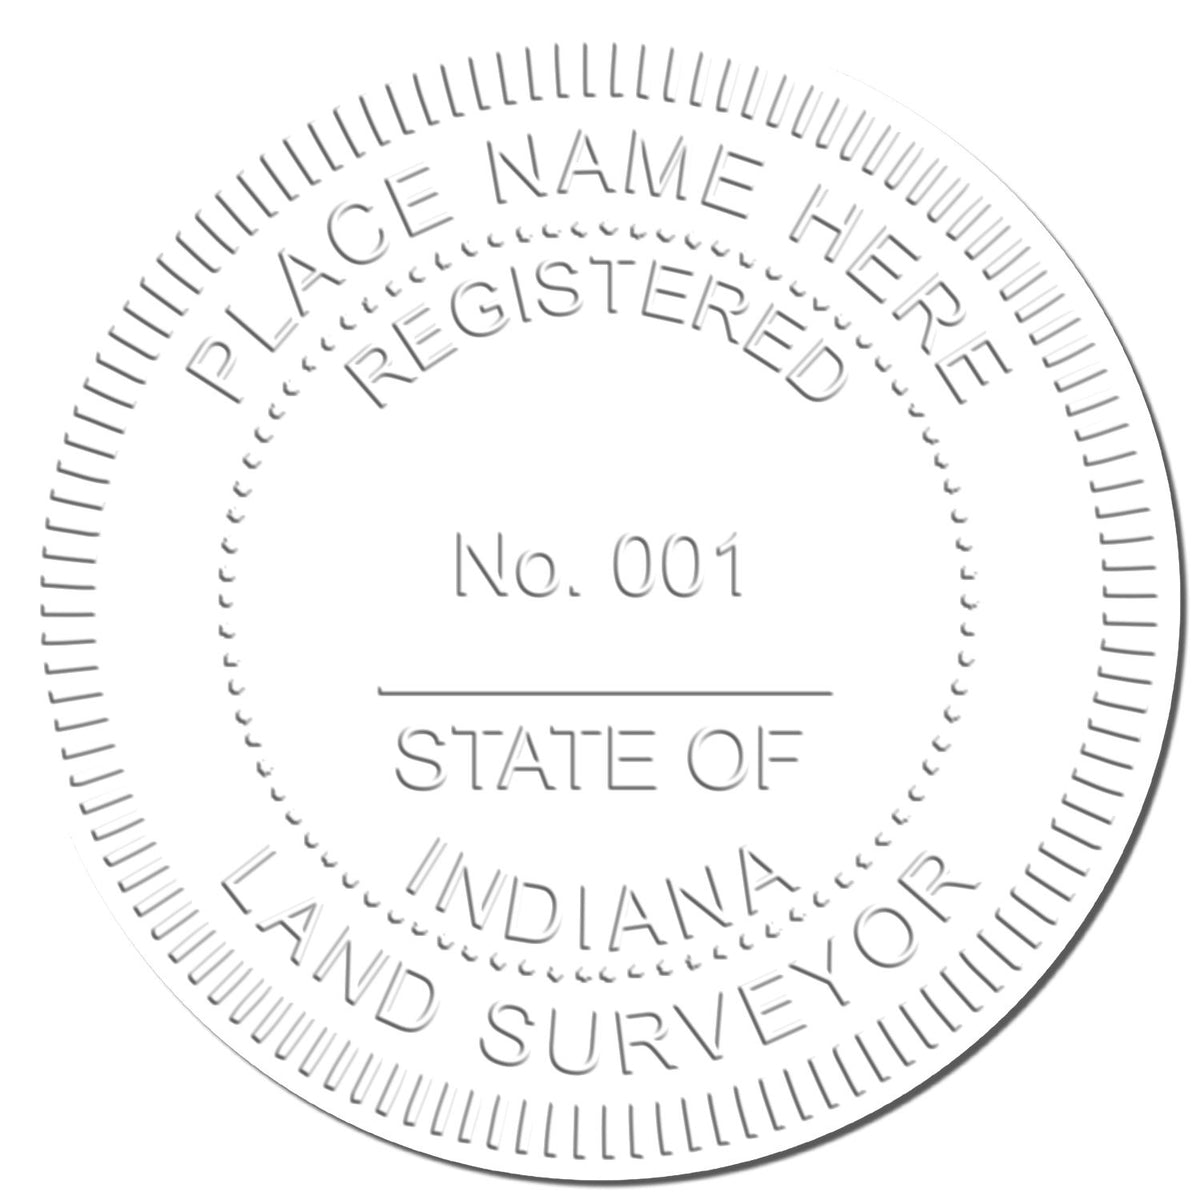 This paper is stamped with a sample imprint of the Heavy Duty Cast Iron Indiana Land Surveyor Seal Embosser, signifying its quality and reliability.